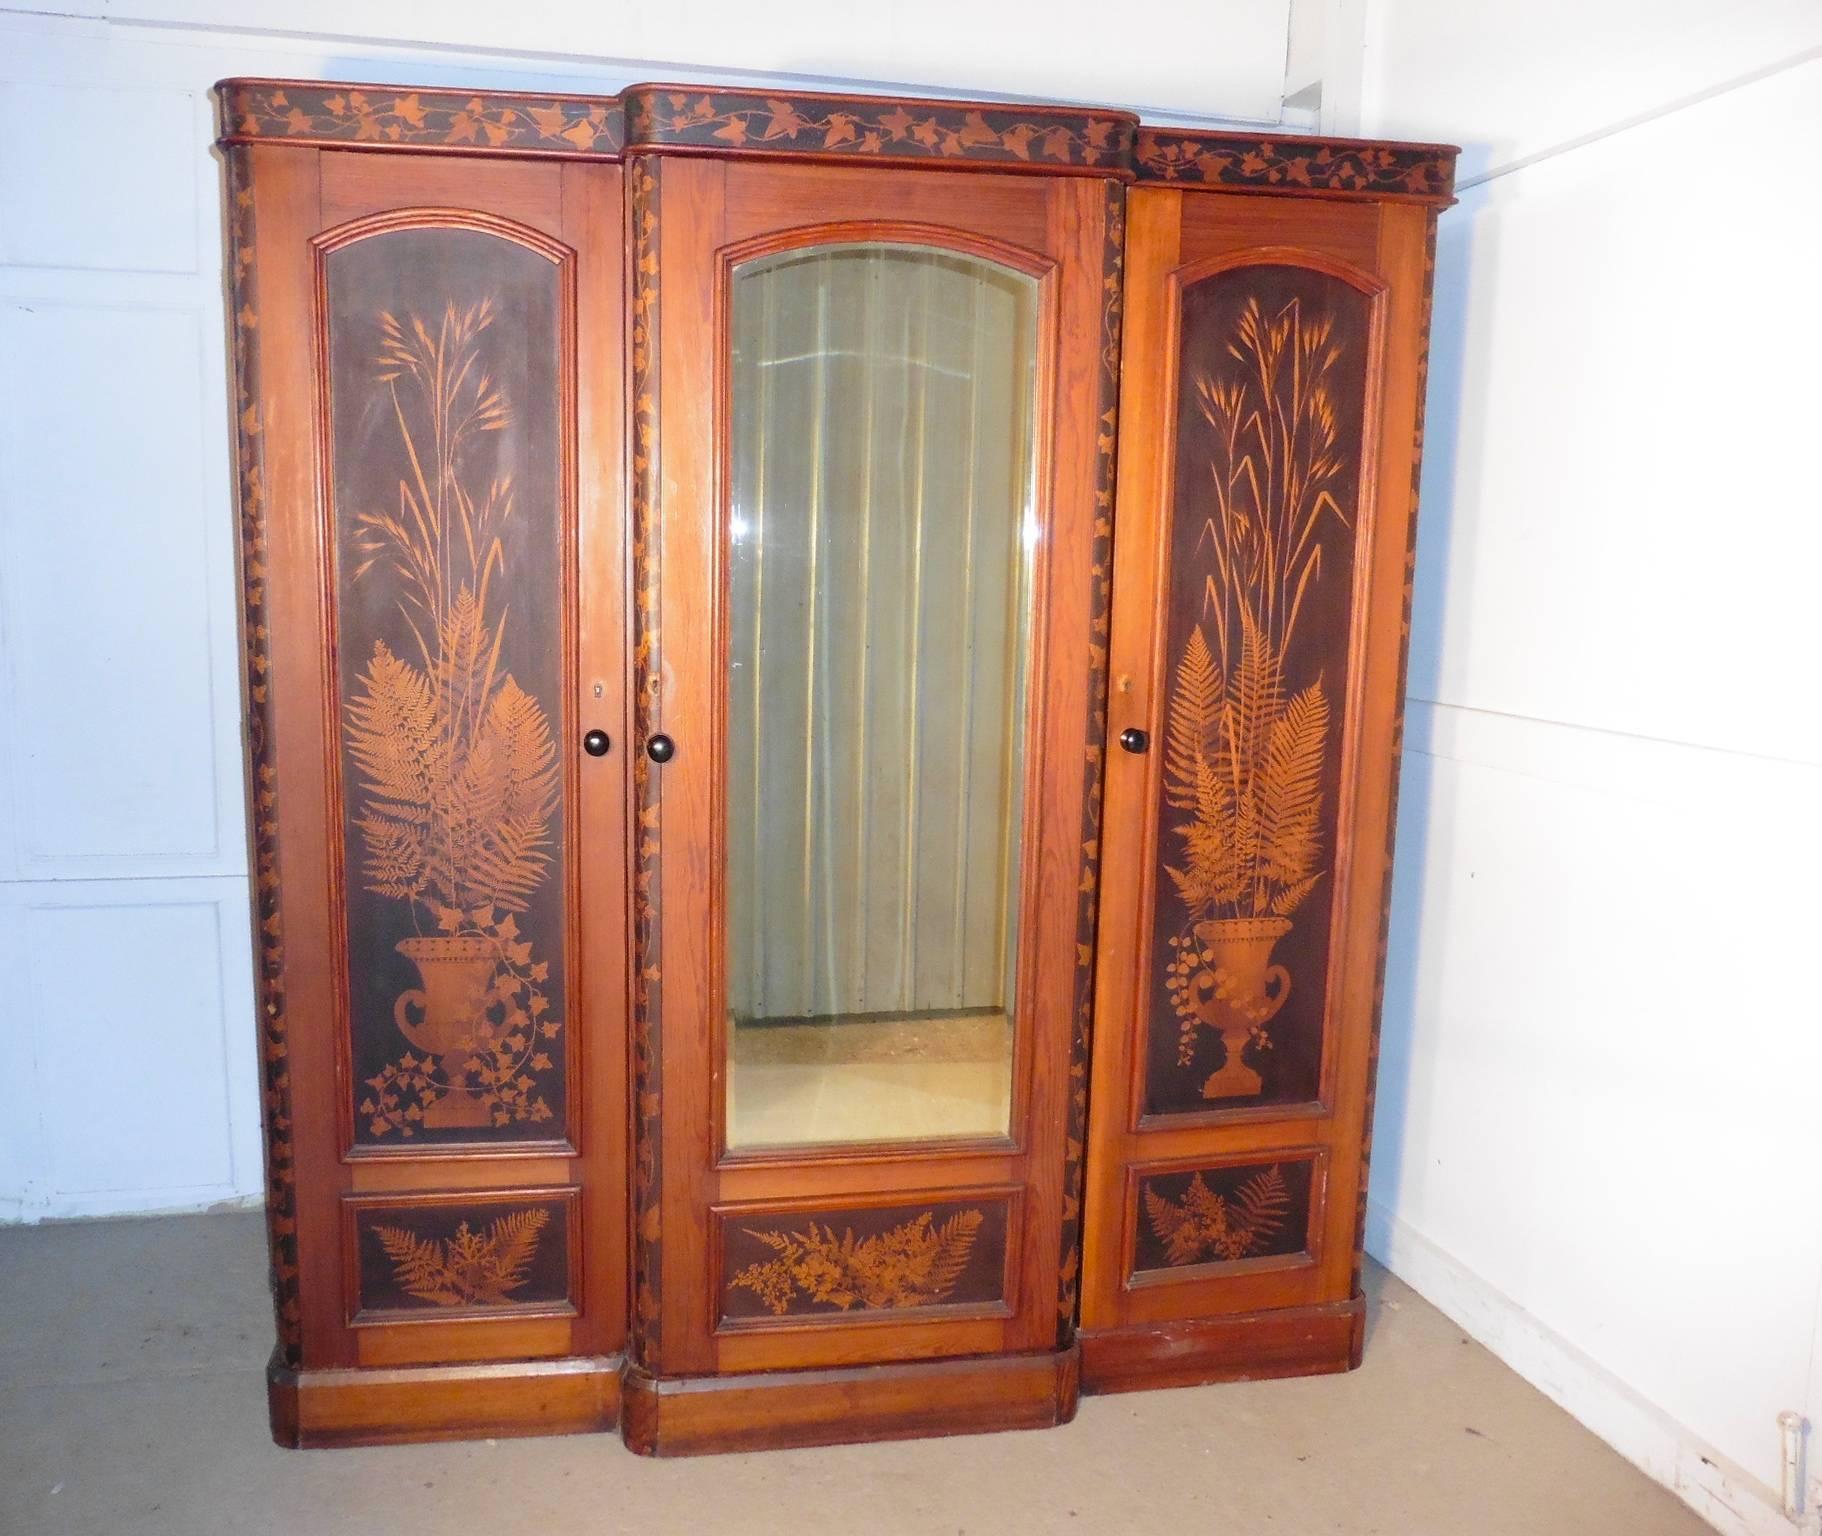 Late 19th Century Victorian Painted Pine Arts & Crafts Wardrobe Decorated with Ferns and Leaves